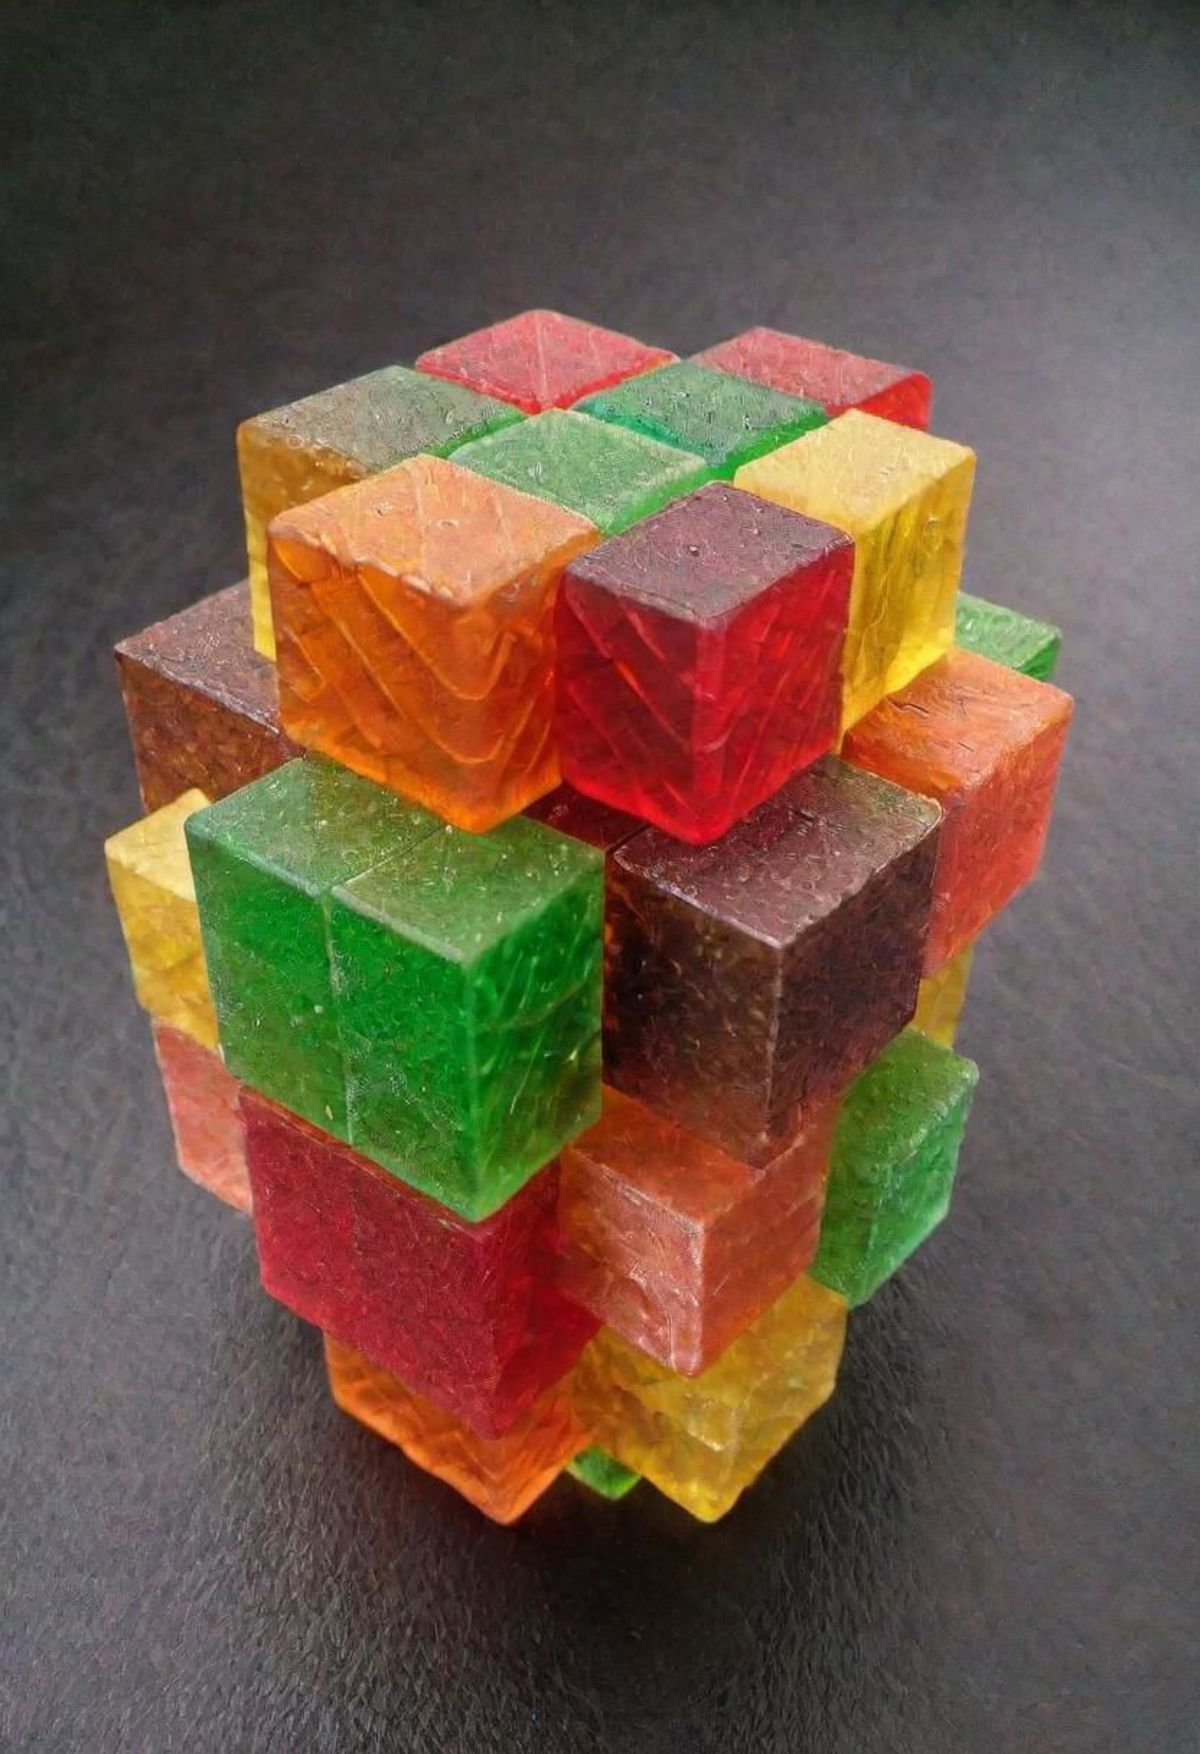 A colorful cube made of jello cubes.